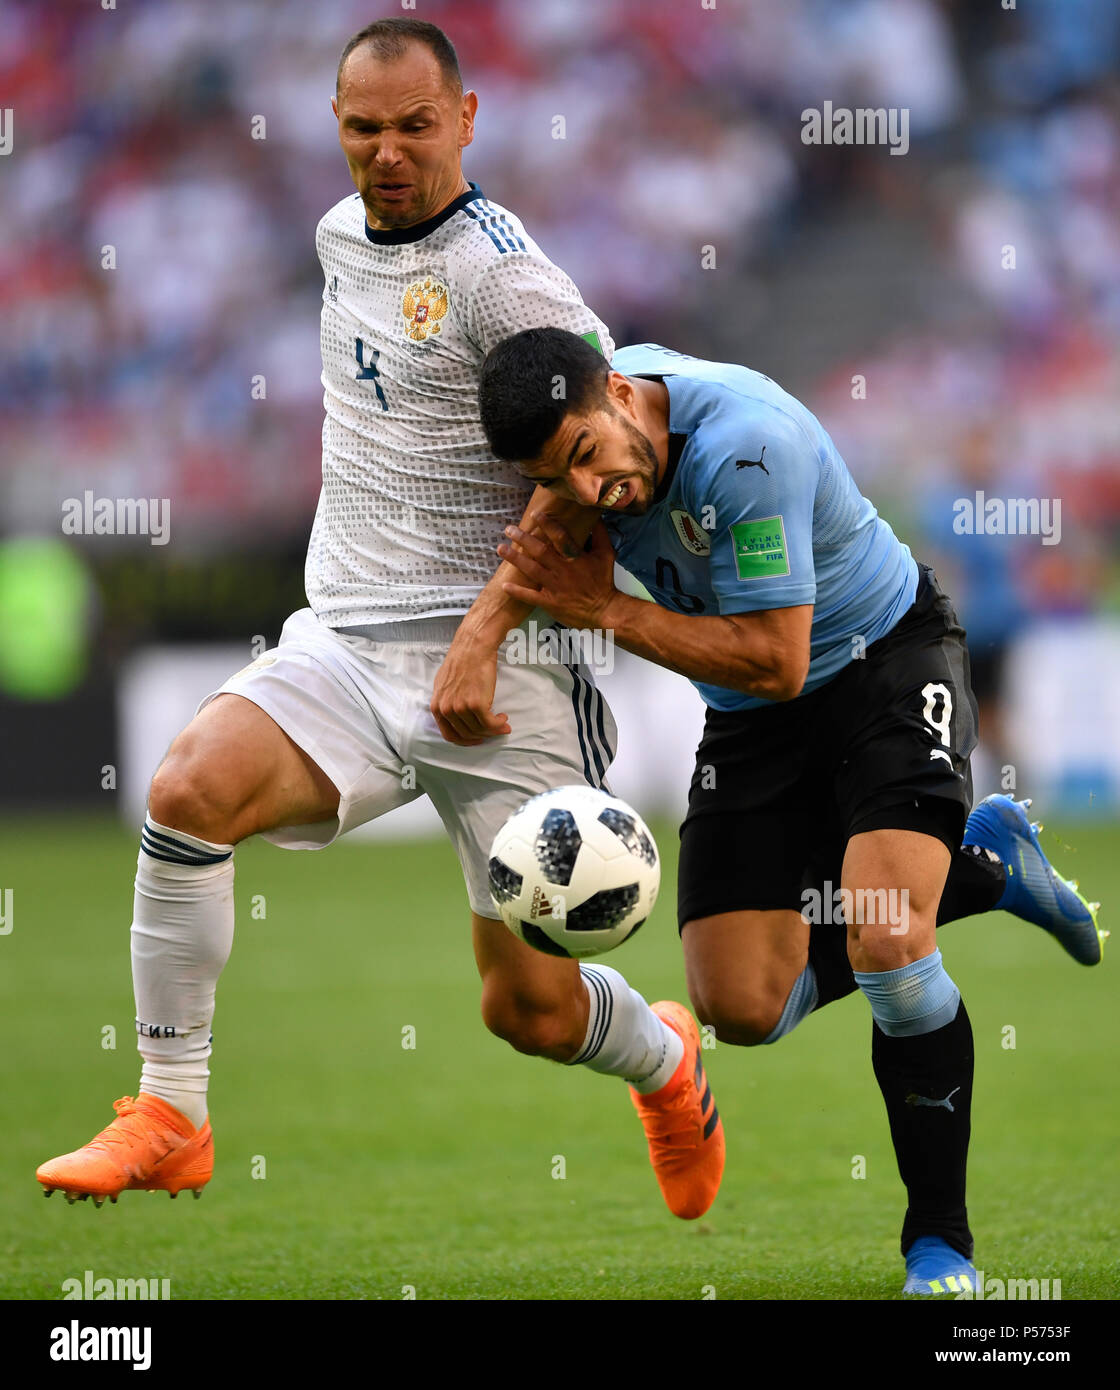 Samara, Russia. 25th June, 2018. Soccer: World Cup, group stages, group A, 3rd matchday Uruguay vs Russia, at Samara Stadium. Russia's Sergei Ignashevich and Uruguay's Luis Suarez (R) vie for the ball. Credit: Marius Becker/dpa/Alamy Live News Stock Photo